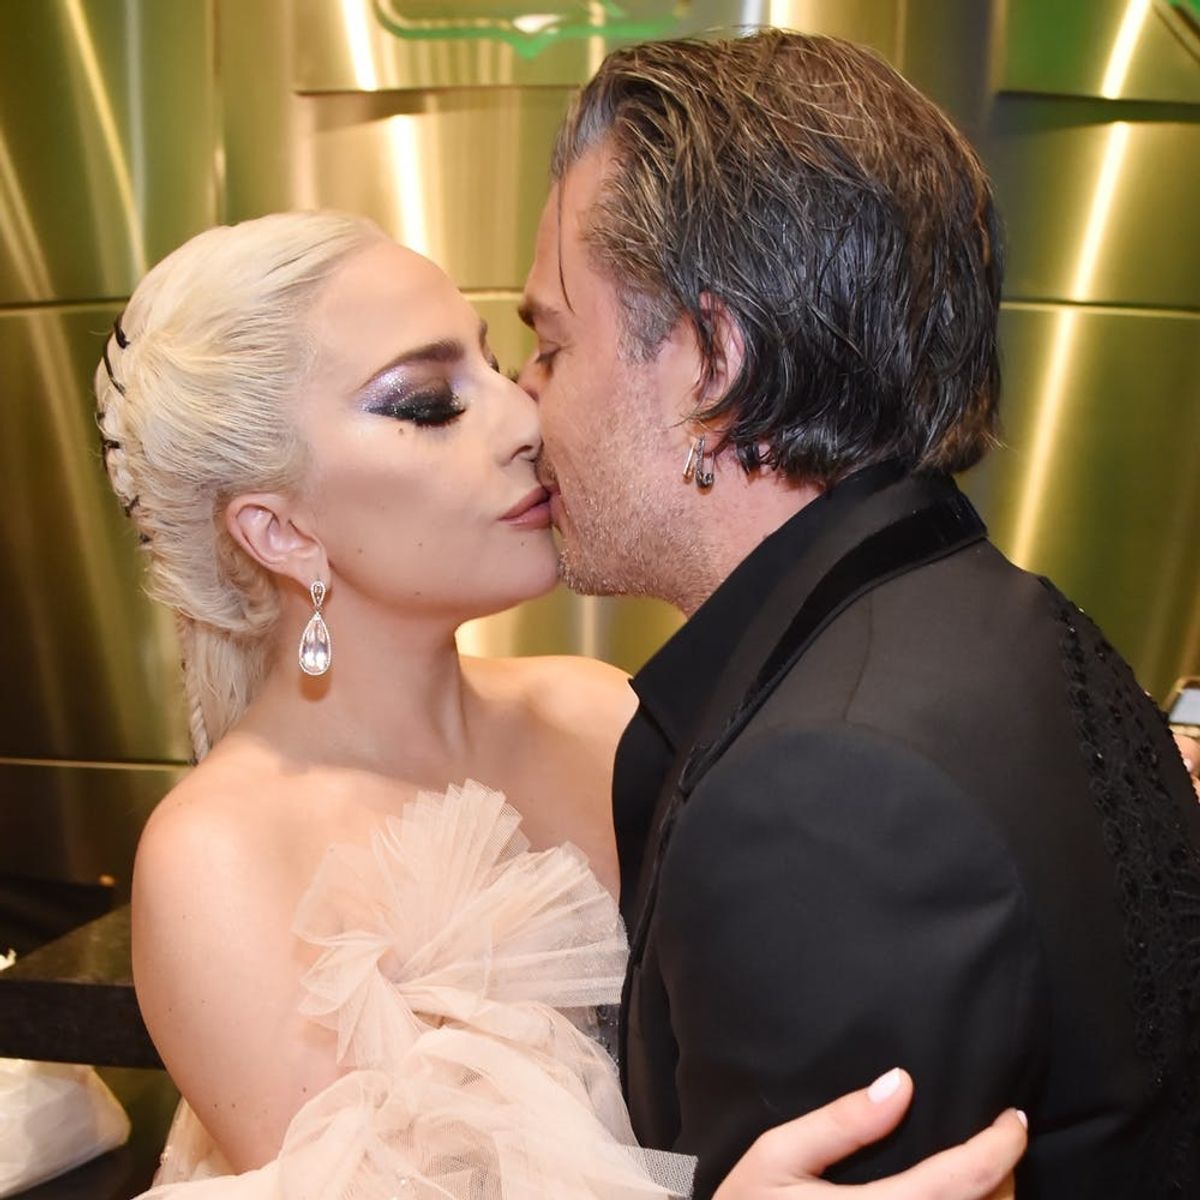 18 Fun Photos from Backstage at the 2018 Grammys, Just Because